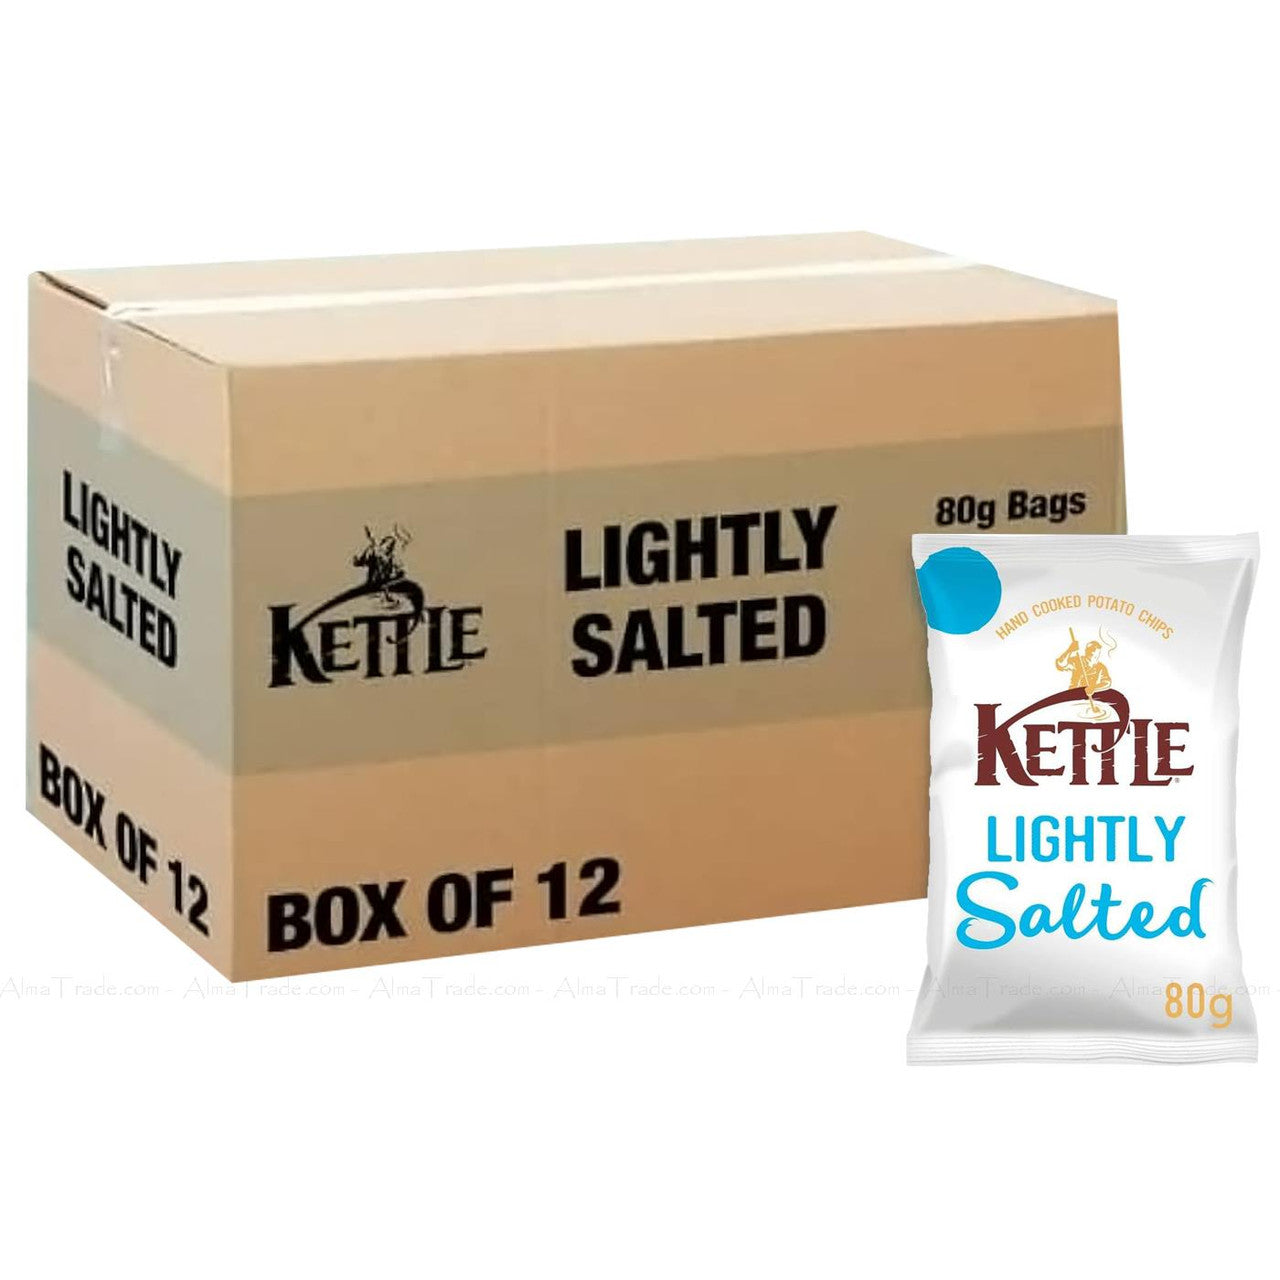 Kettle Lightly Salted - 80g - Pack of 12